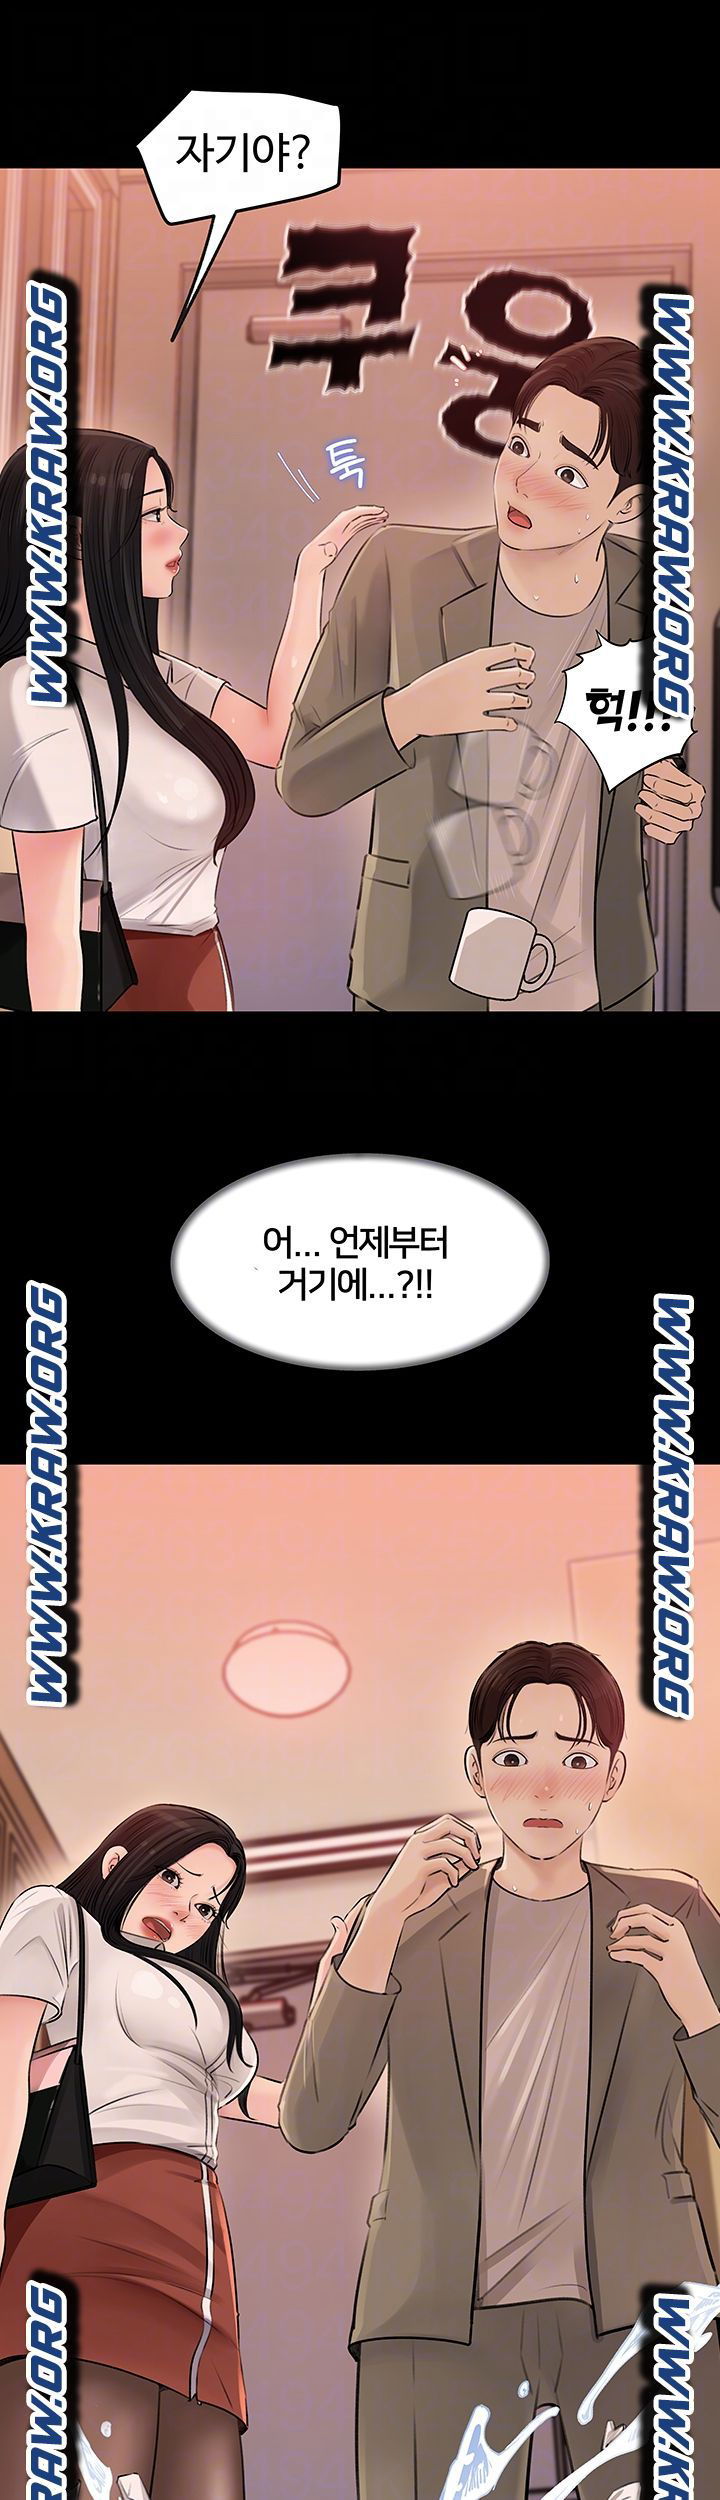 in-my-sister-in-law-raw-chap-3-7